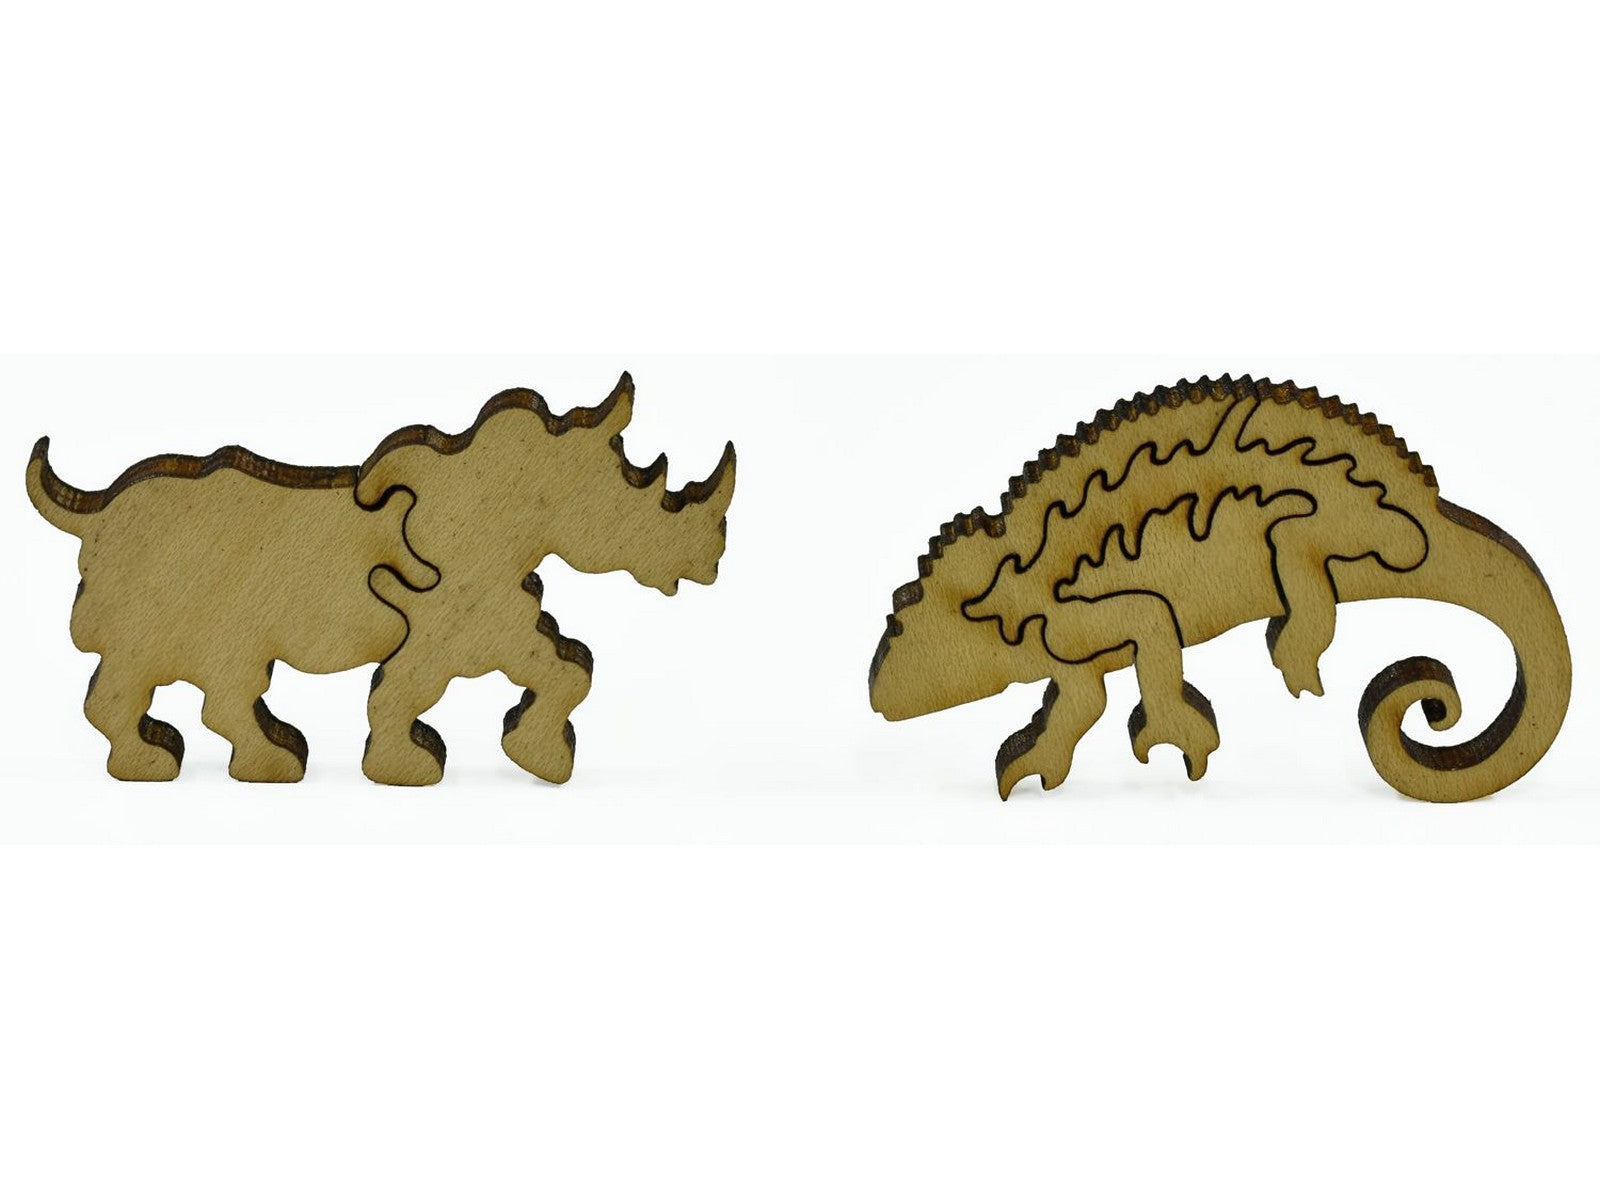 A closeup of pieces showing a rhino and a chameleon.